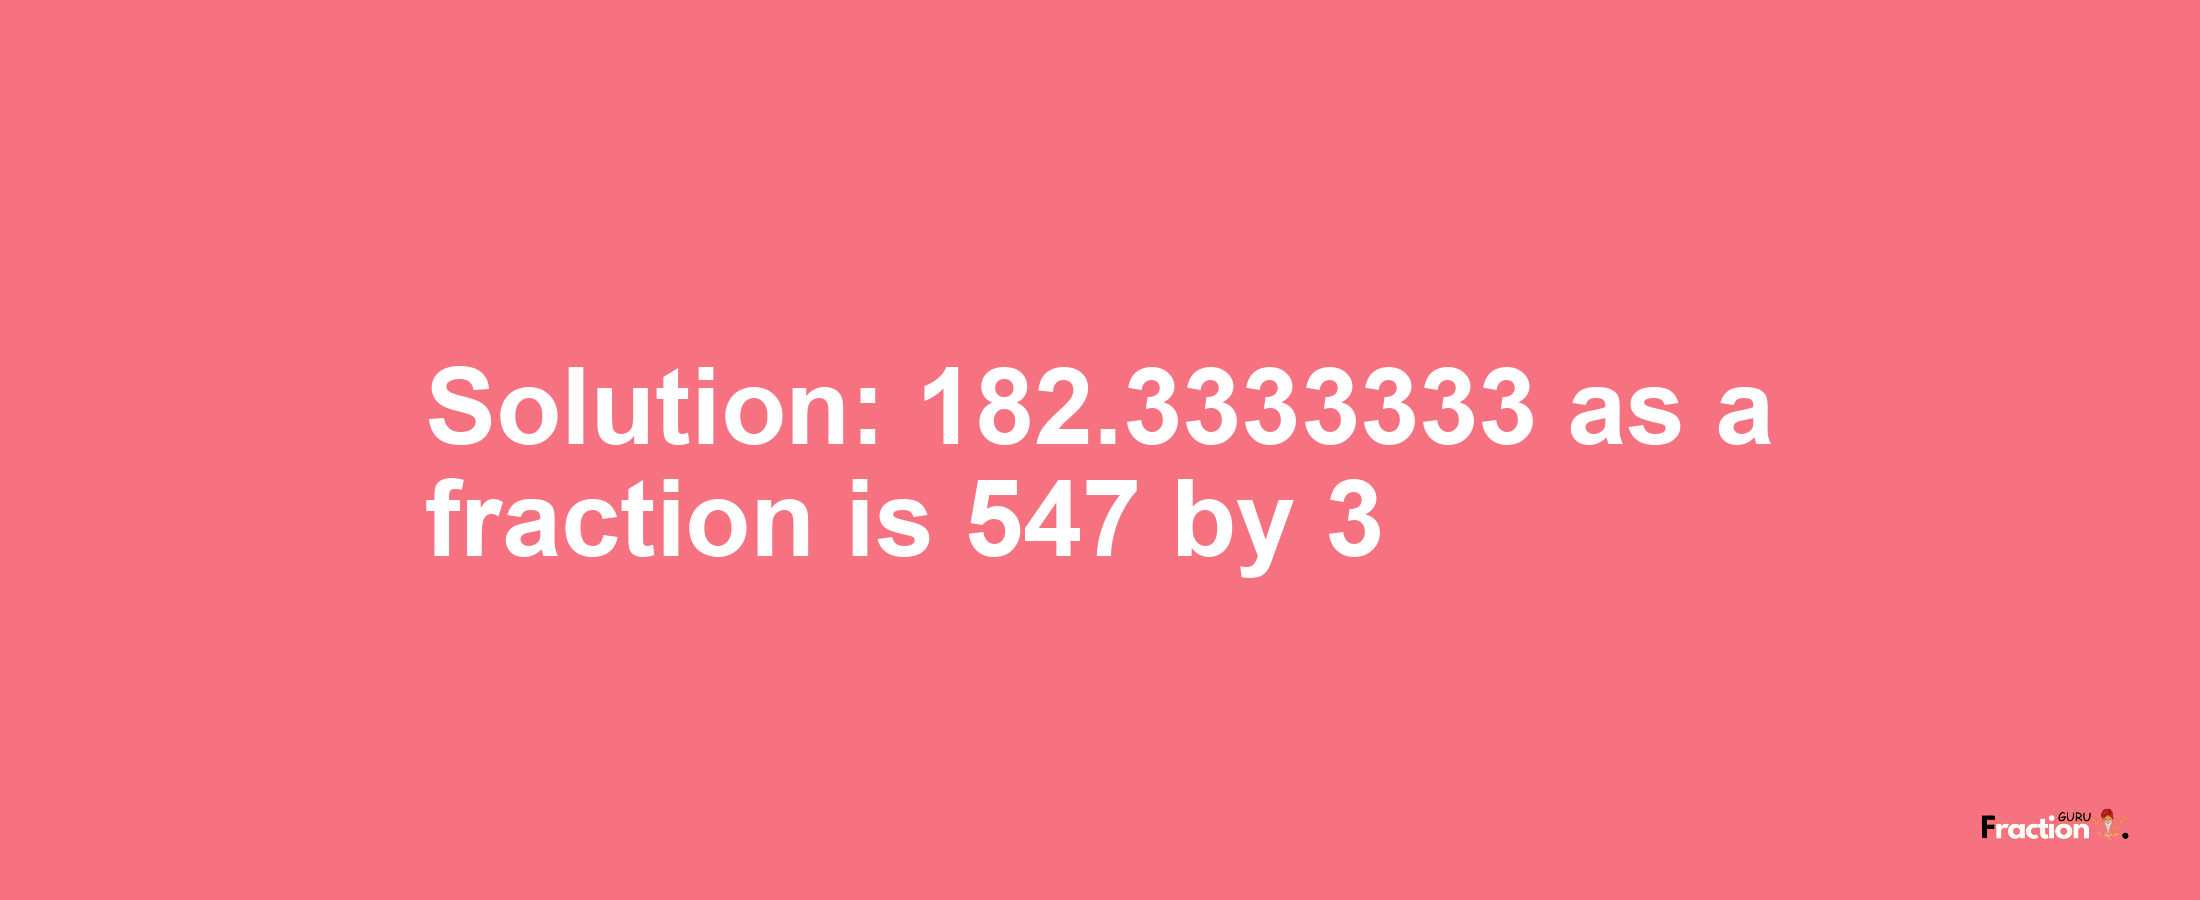 Solution:182.3333333 as a fraction is 547/3